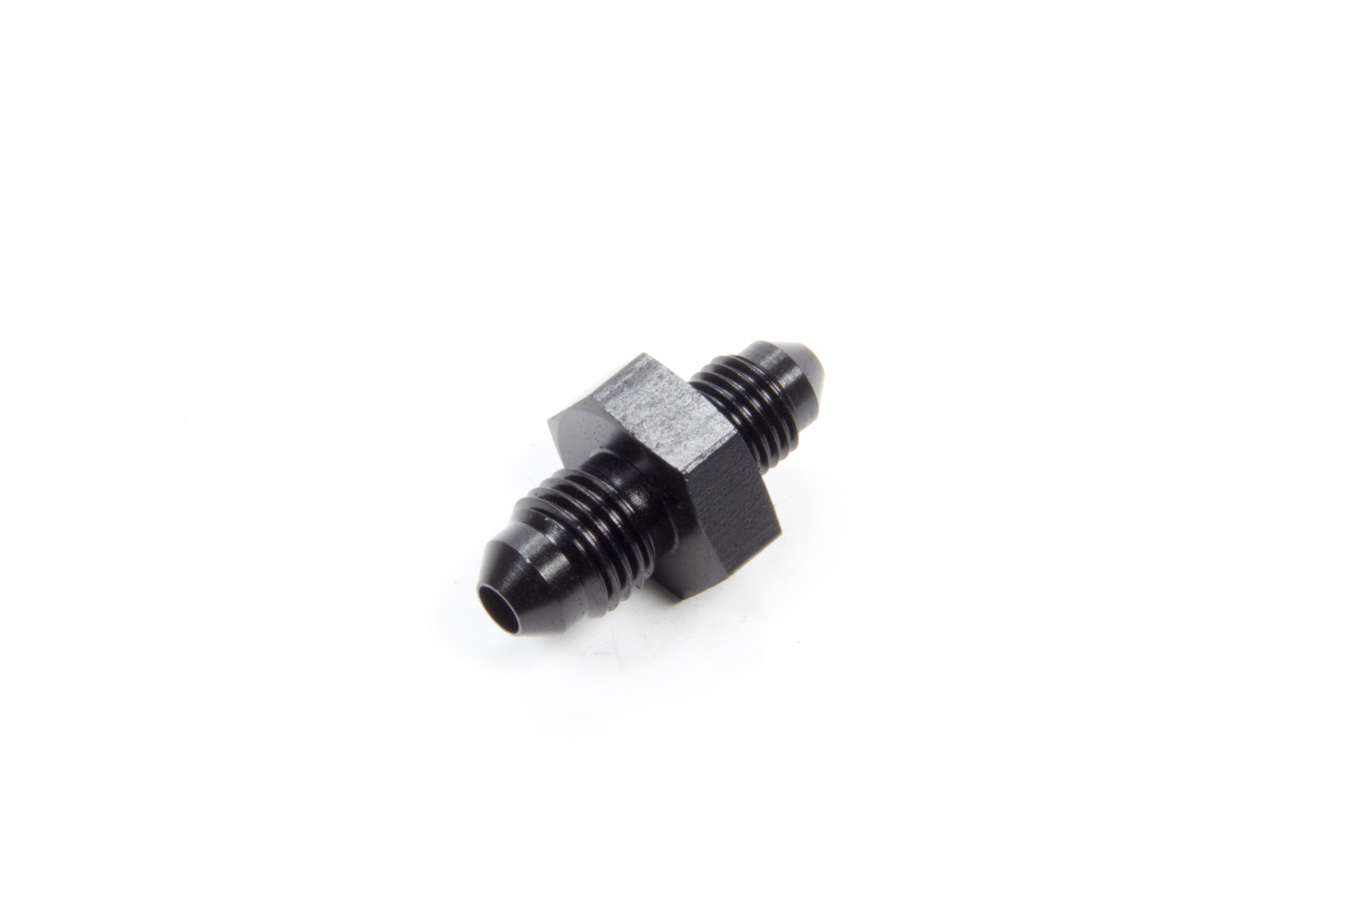 Aeroquip FCM5048 Fitting, Adapter, Straight, 4 AN Male to 3 AN Male, Aluminum, Black Anodized, Each